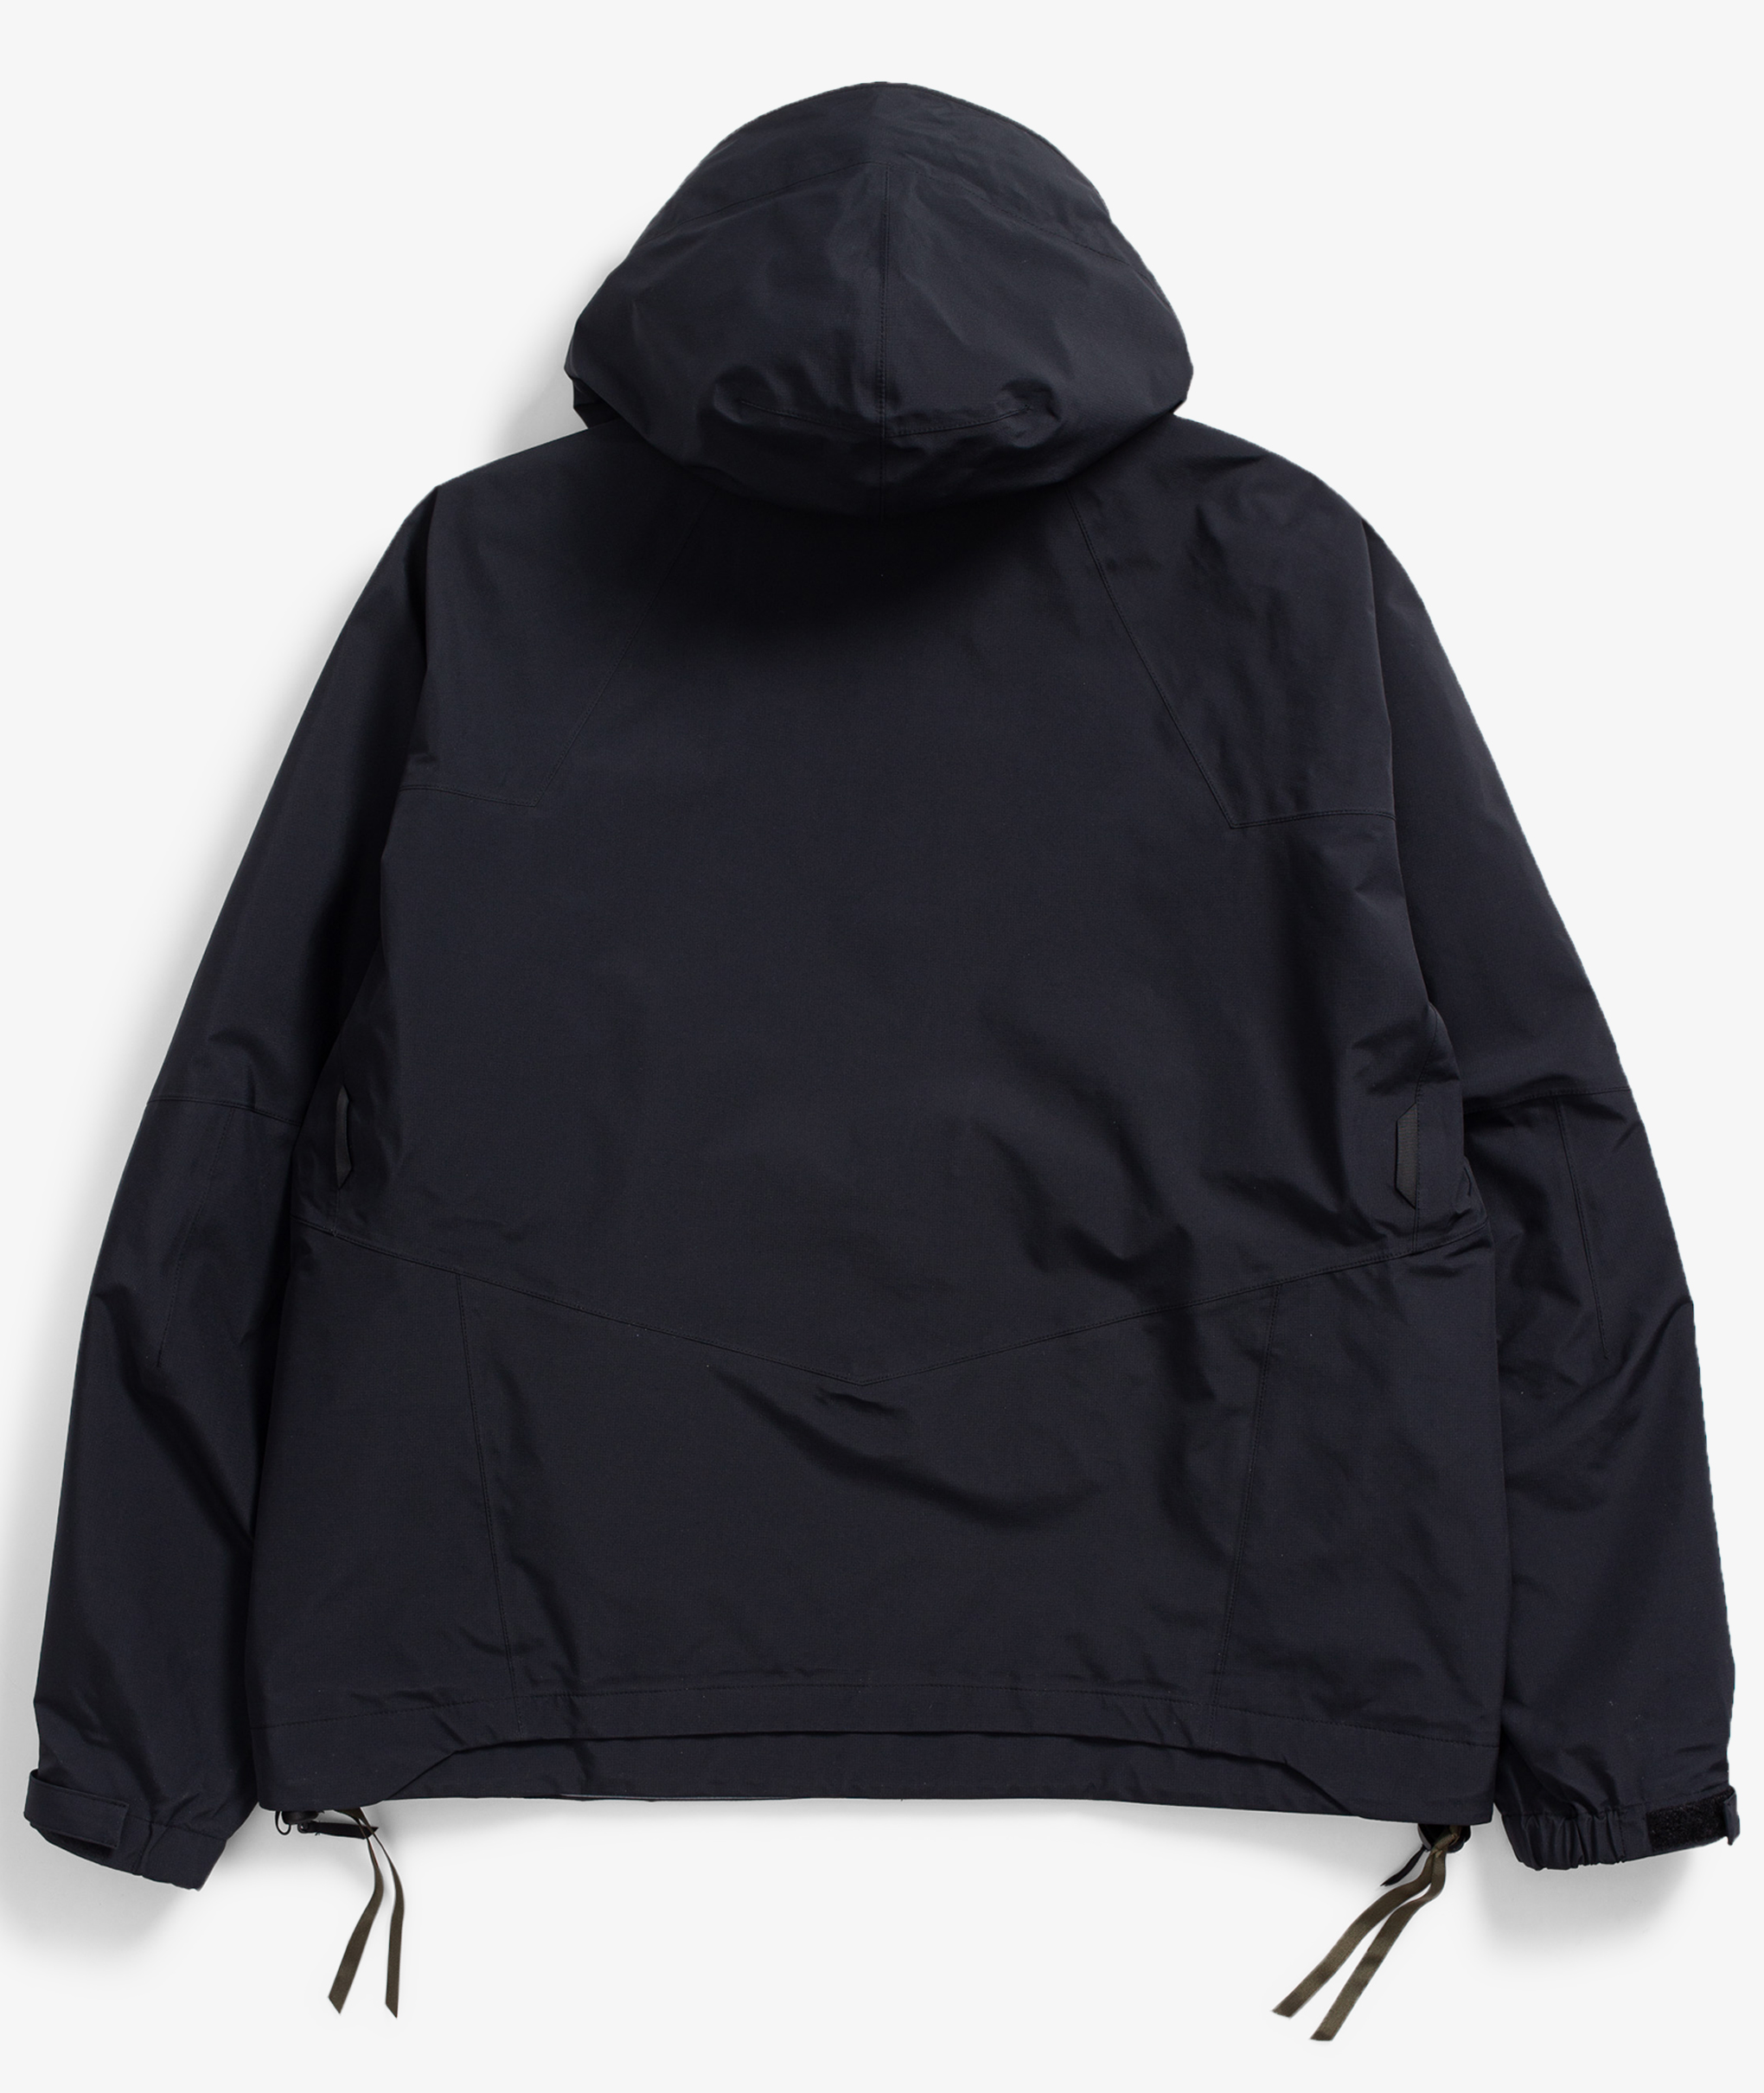 Norse Store Shipping Worldwide Acronym J96-GT Black